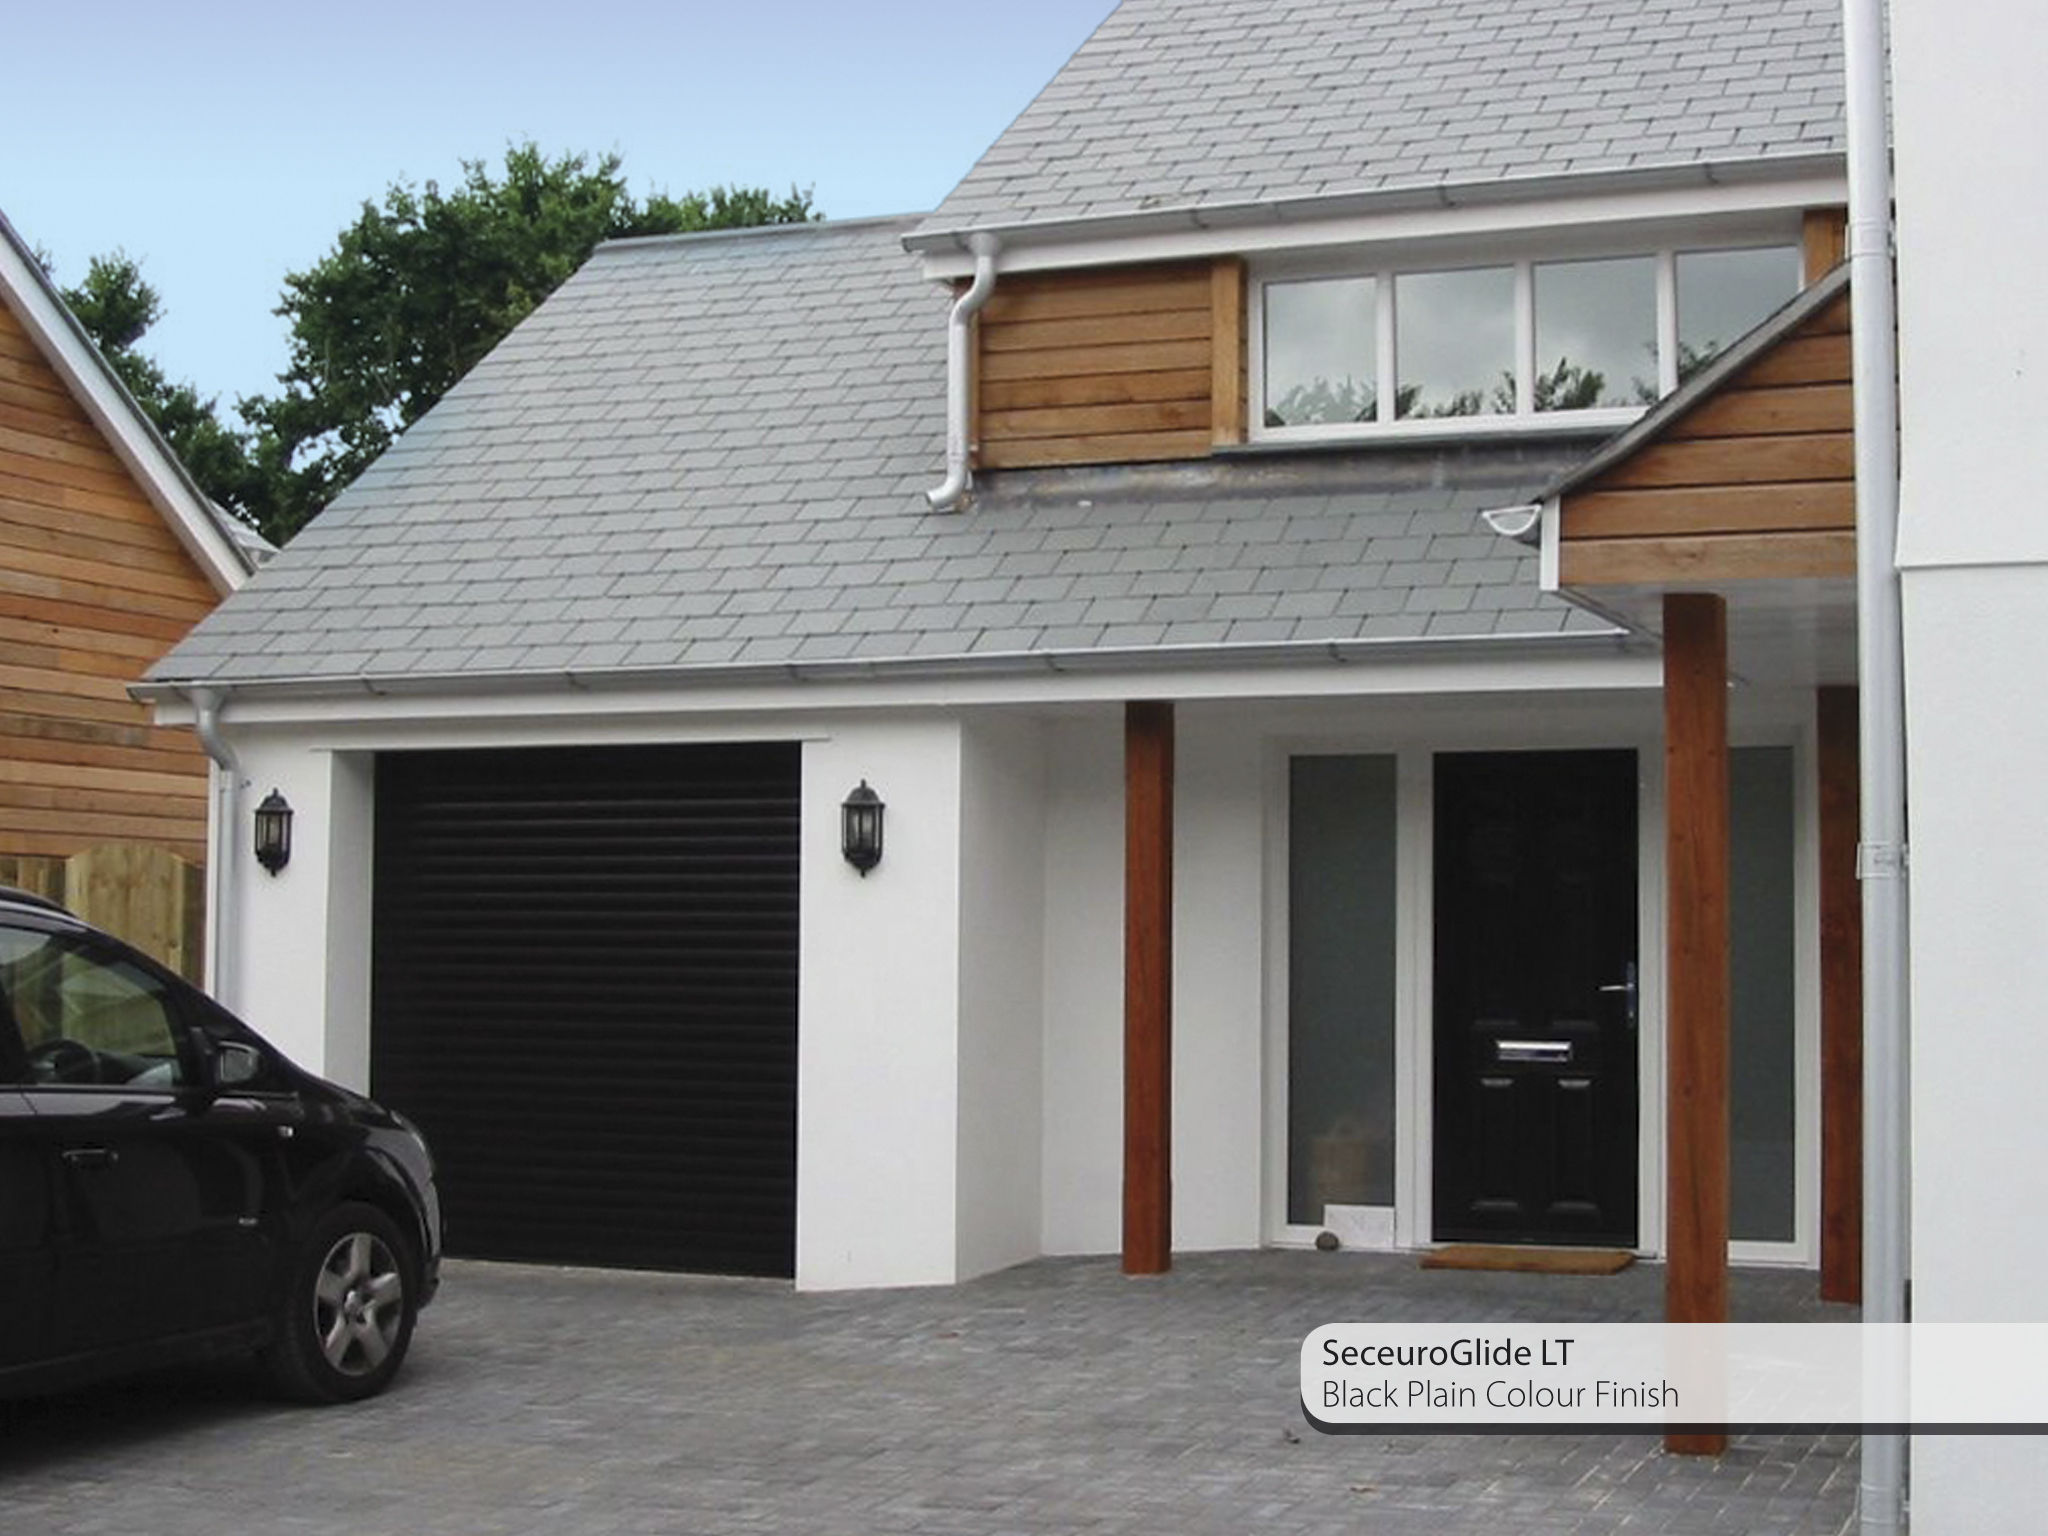 Seceuroglide Lt Roller Door with a hard wearing and long lasting black powder coated paint finish.